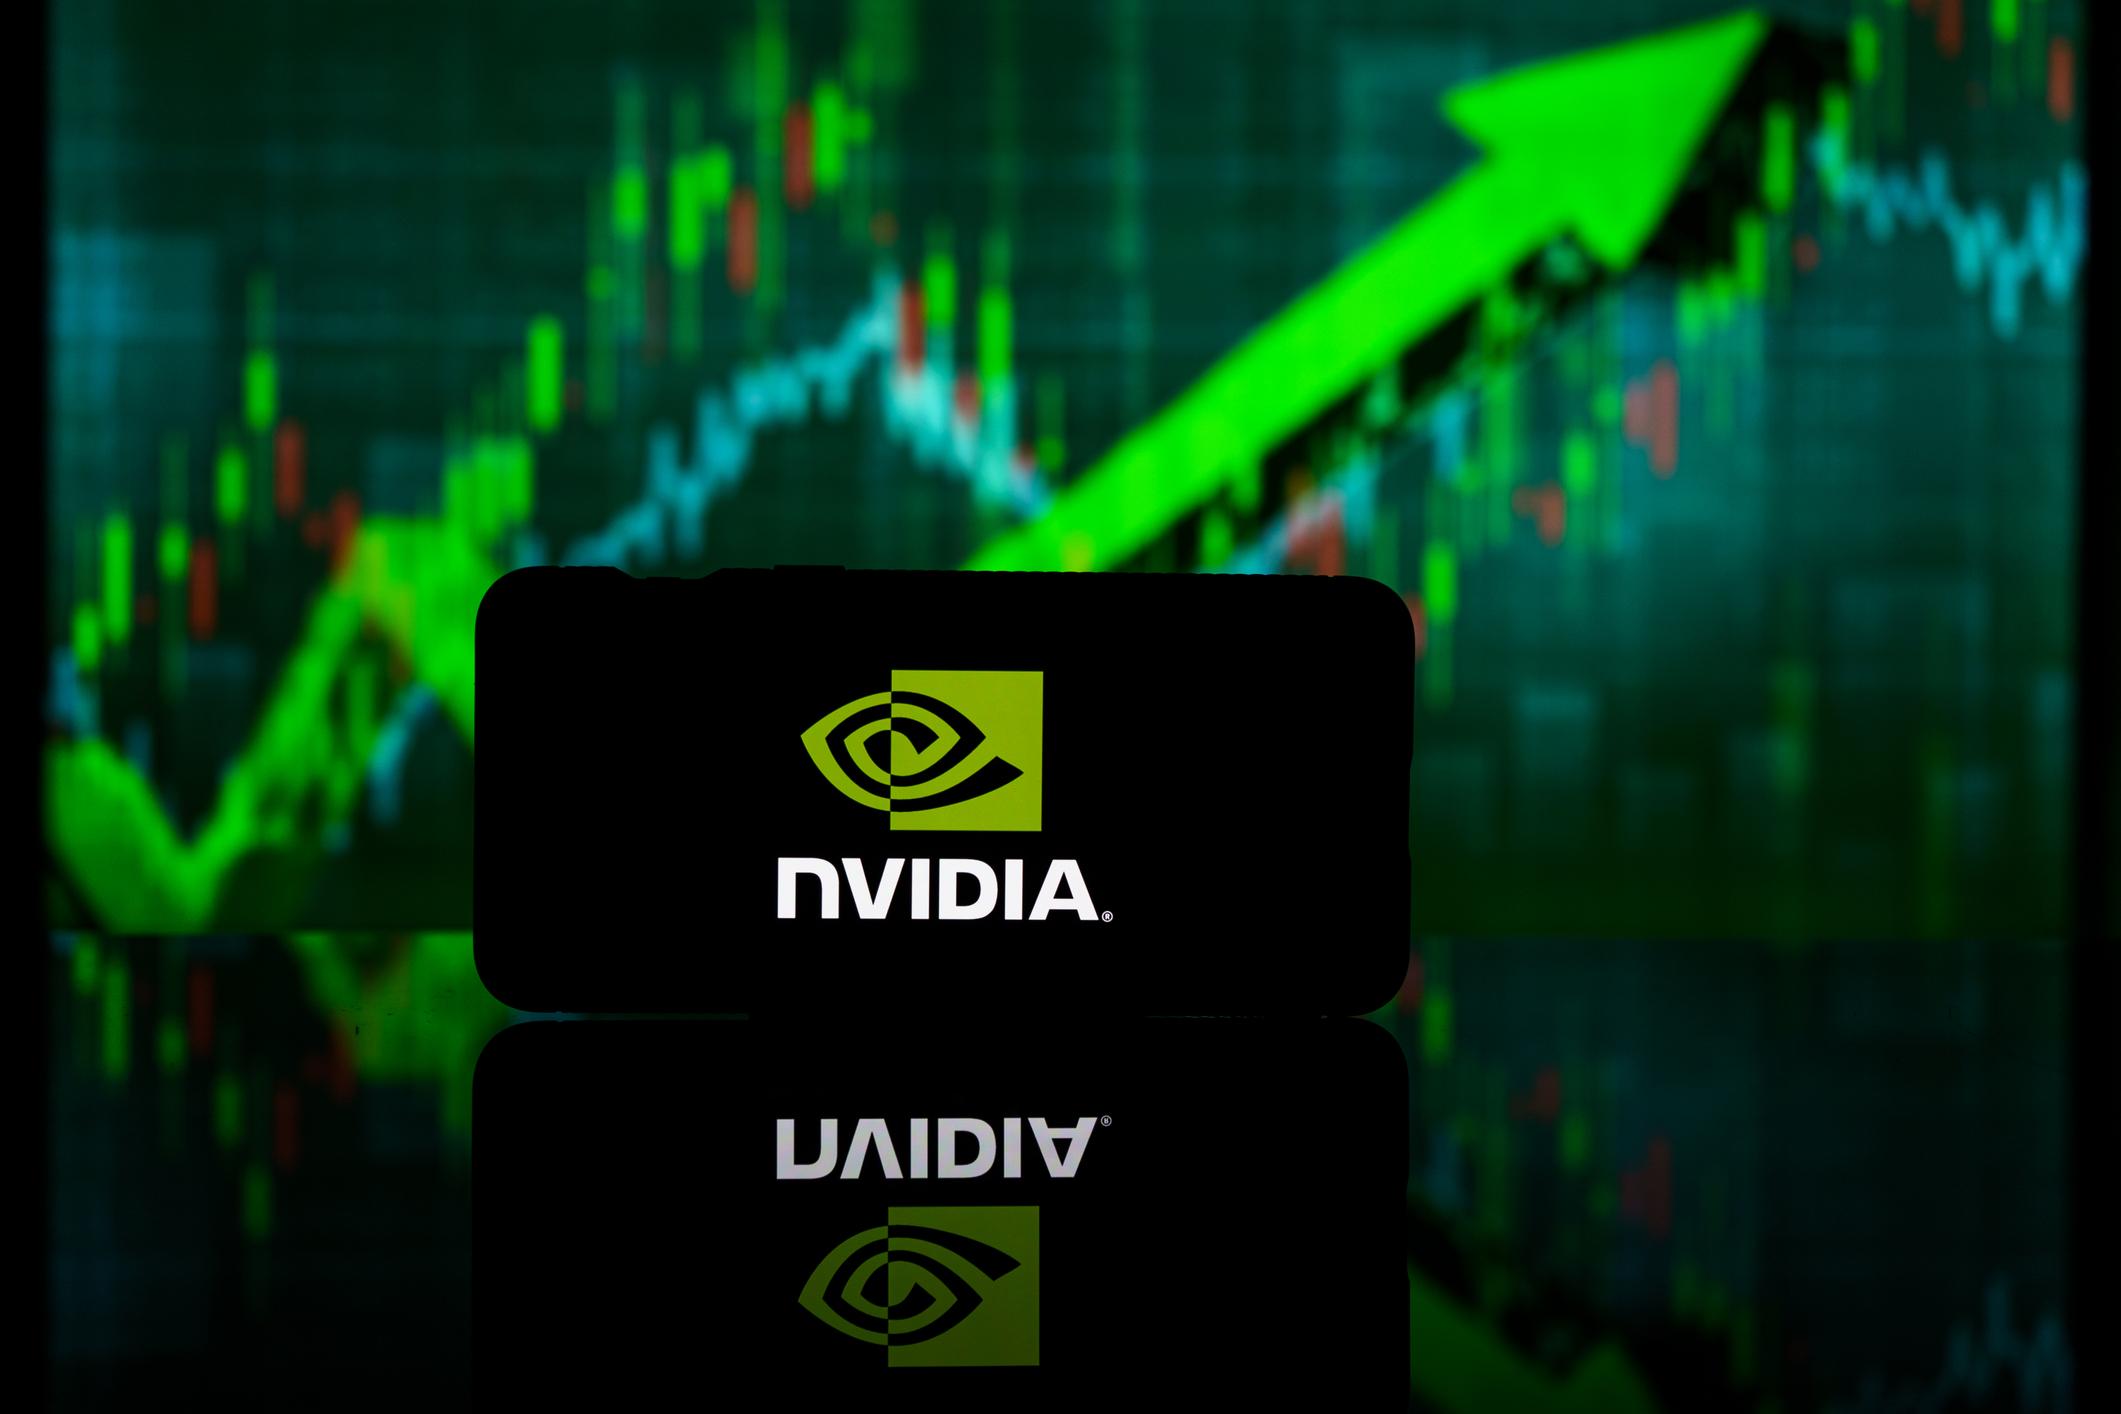 Nvidia Rose, then the Market Fell: It’s “Every Stock for Itself”